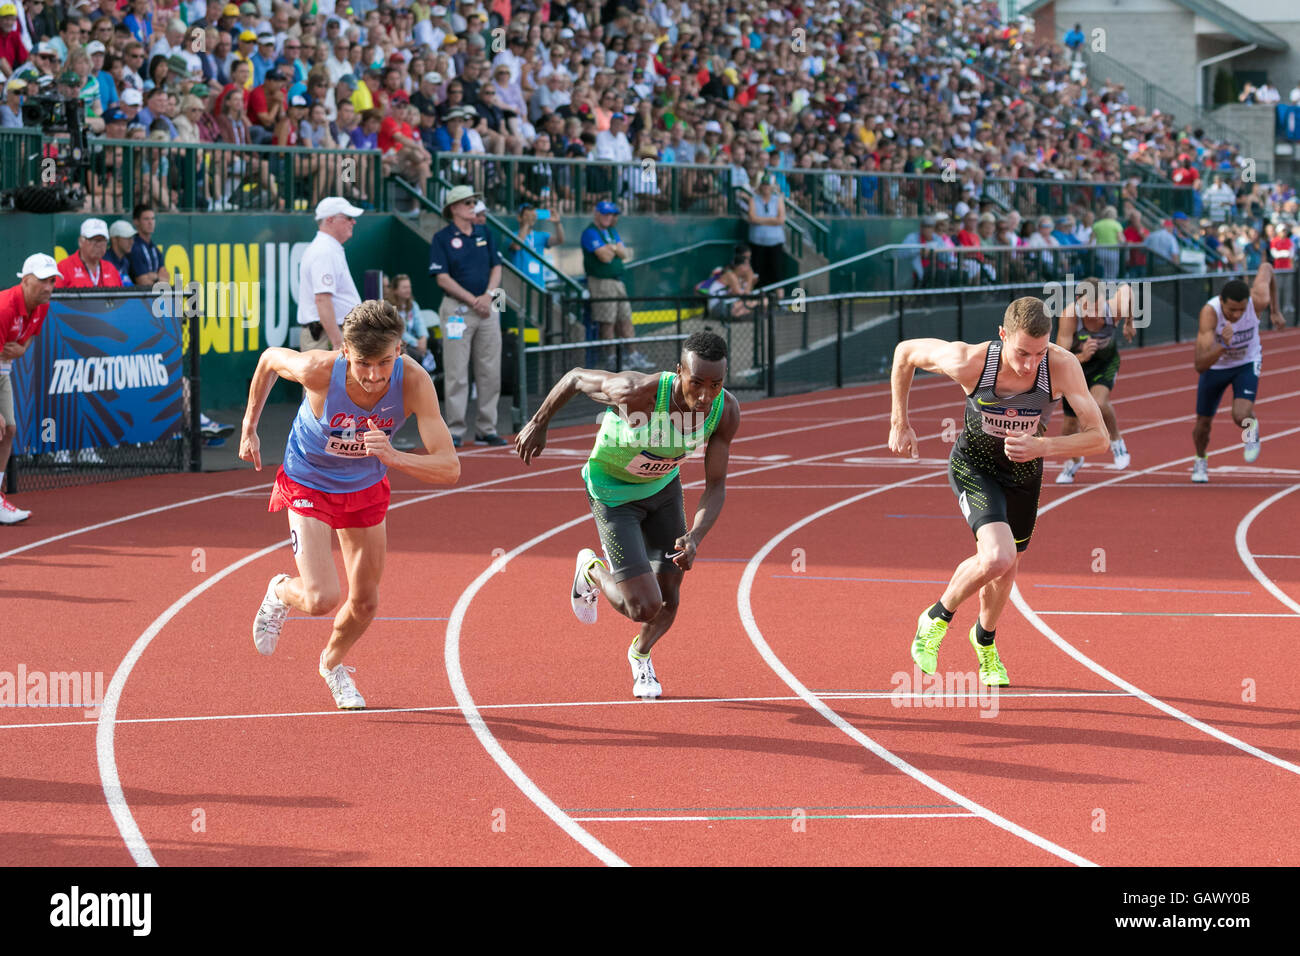 Eugene, USA. 4th July, 2016. Start of the Men's 800m Final at the 2016 USATF Olympic Trials at Historic Hayward Field in Eugene, Oregon, USA. Credit:  Joshua Rainey/Alamy Live News. Stock Photo